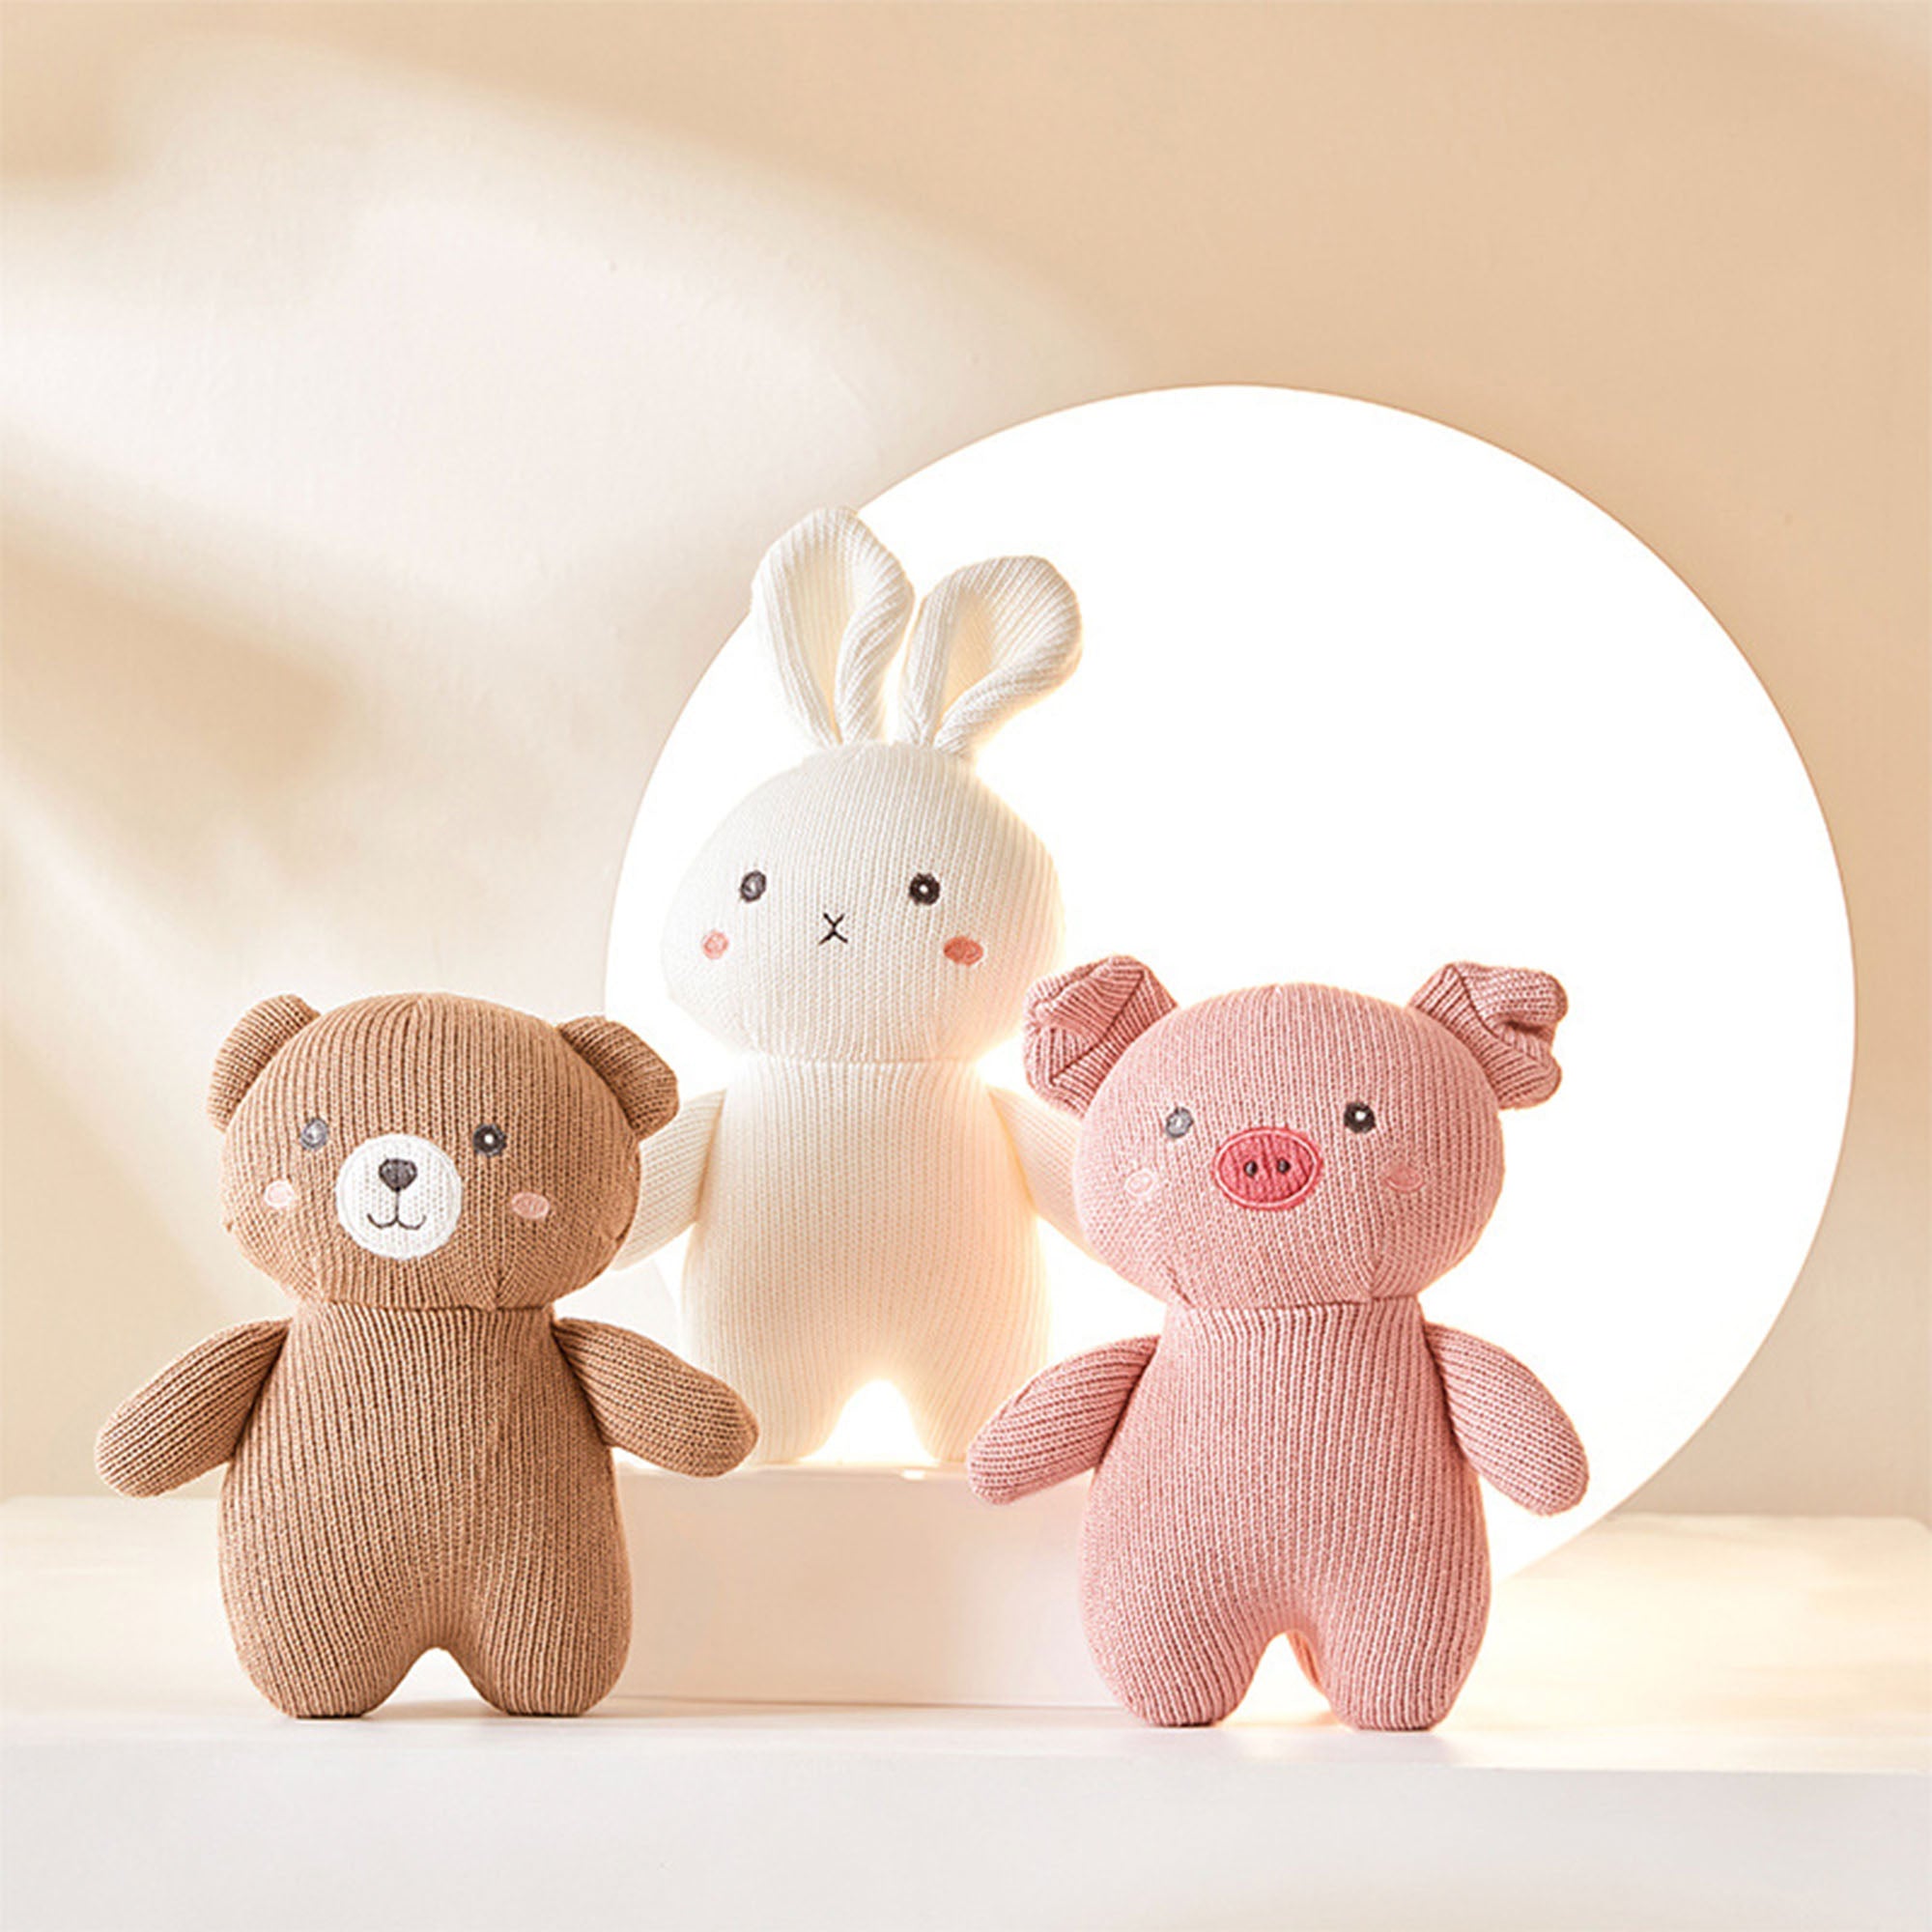 Three stuffed toys sit on a shelf: a brown teddy bear, a white bunny, and a pink pig.